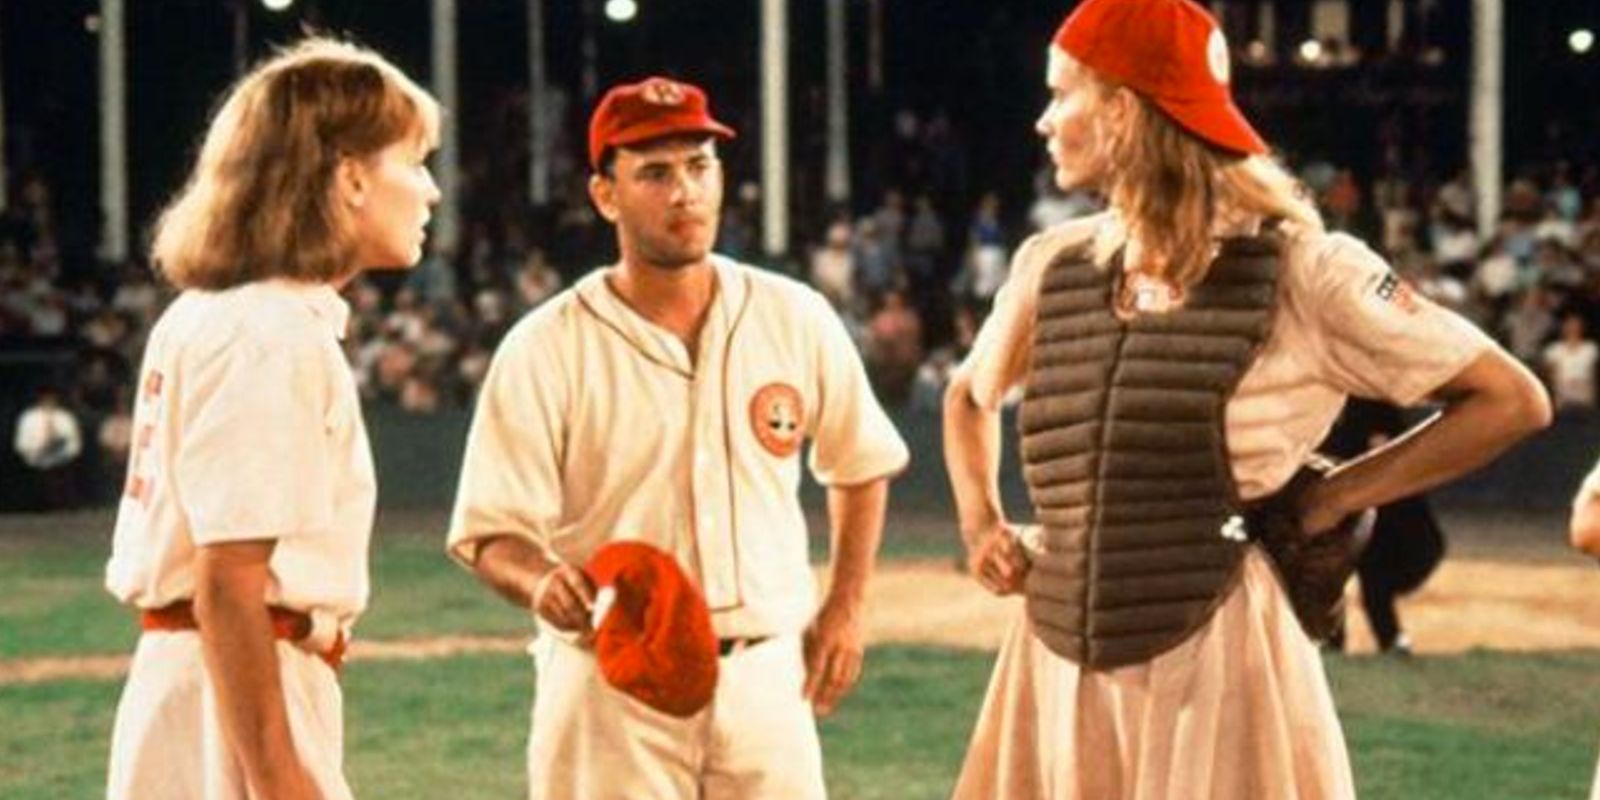 Dottie, Kit, and Jimmy on the mound during a game in A League of Their Own